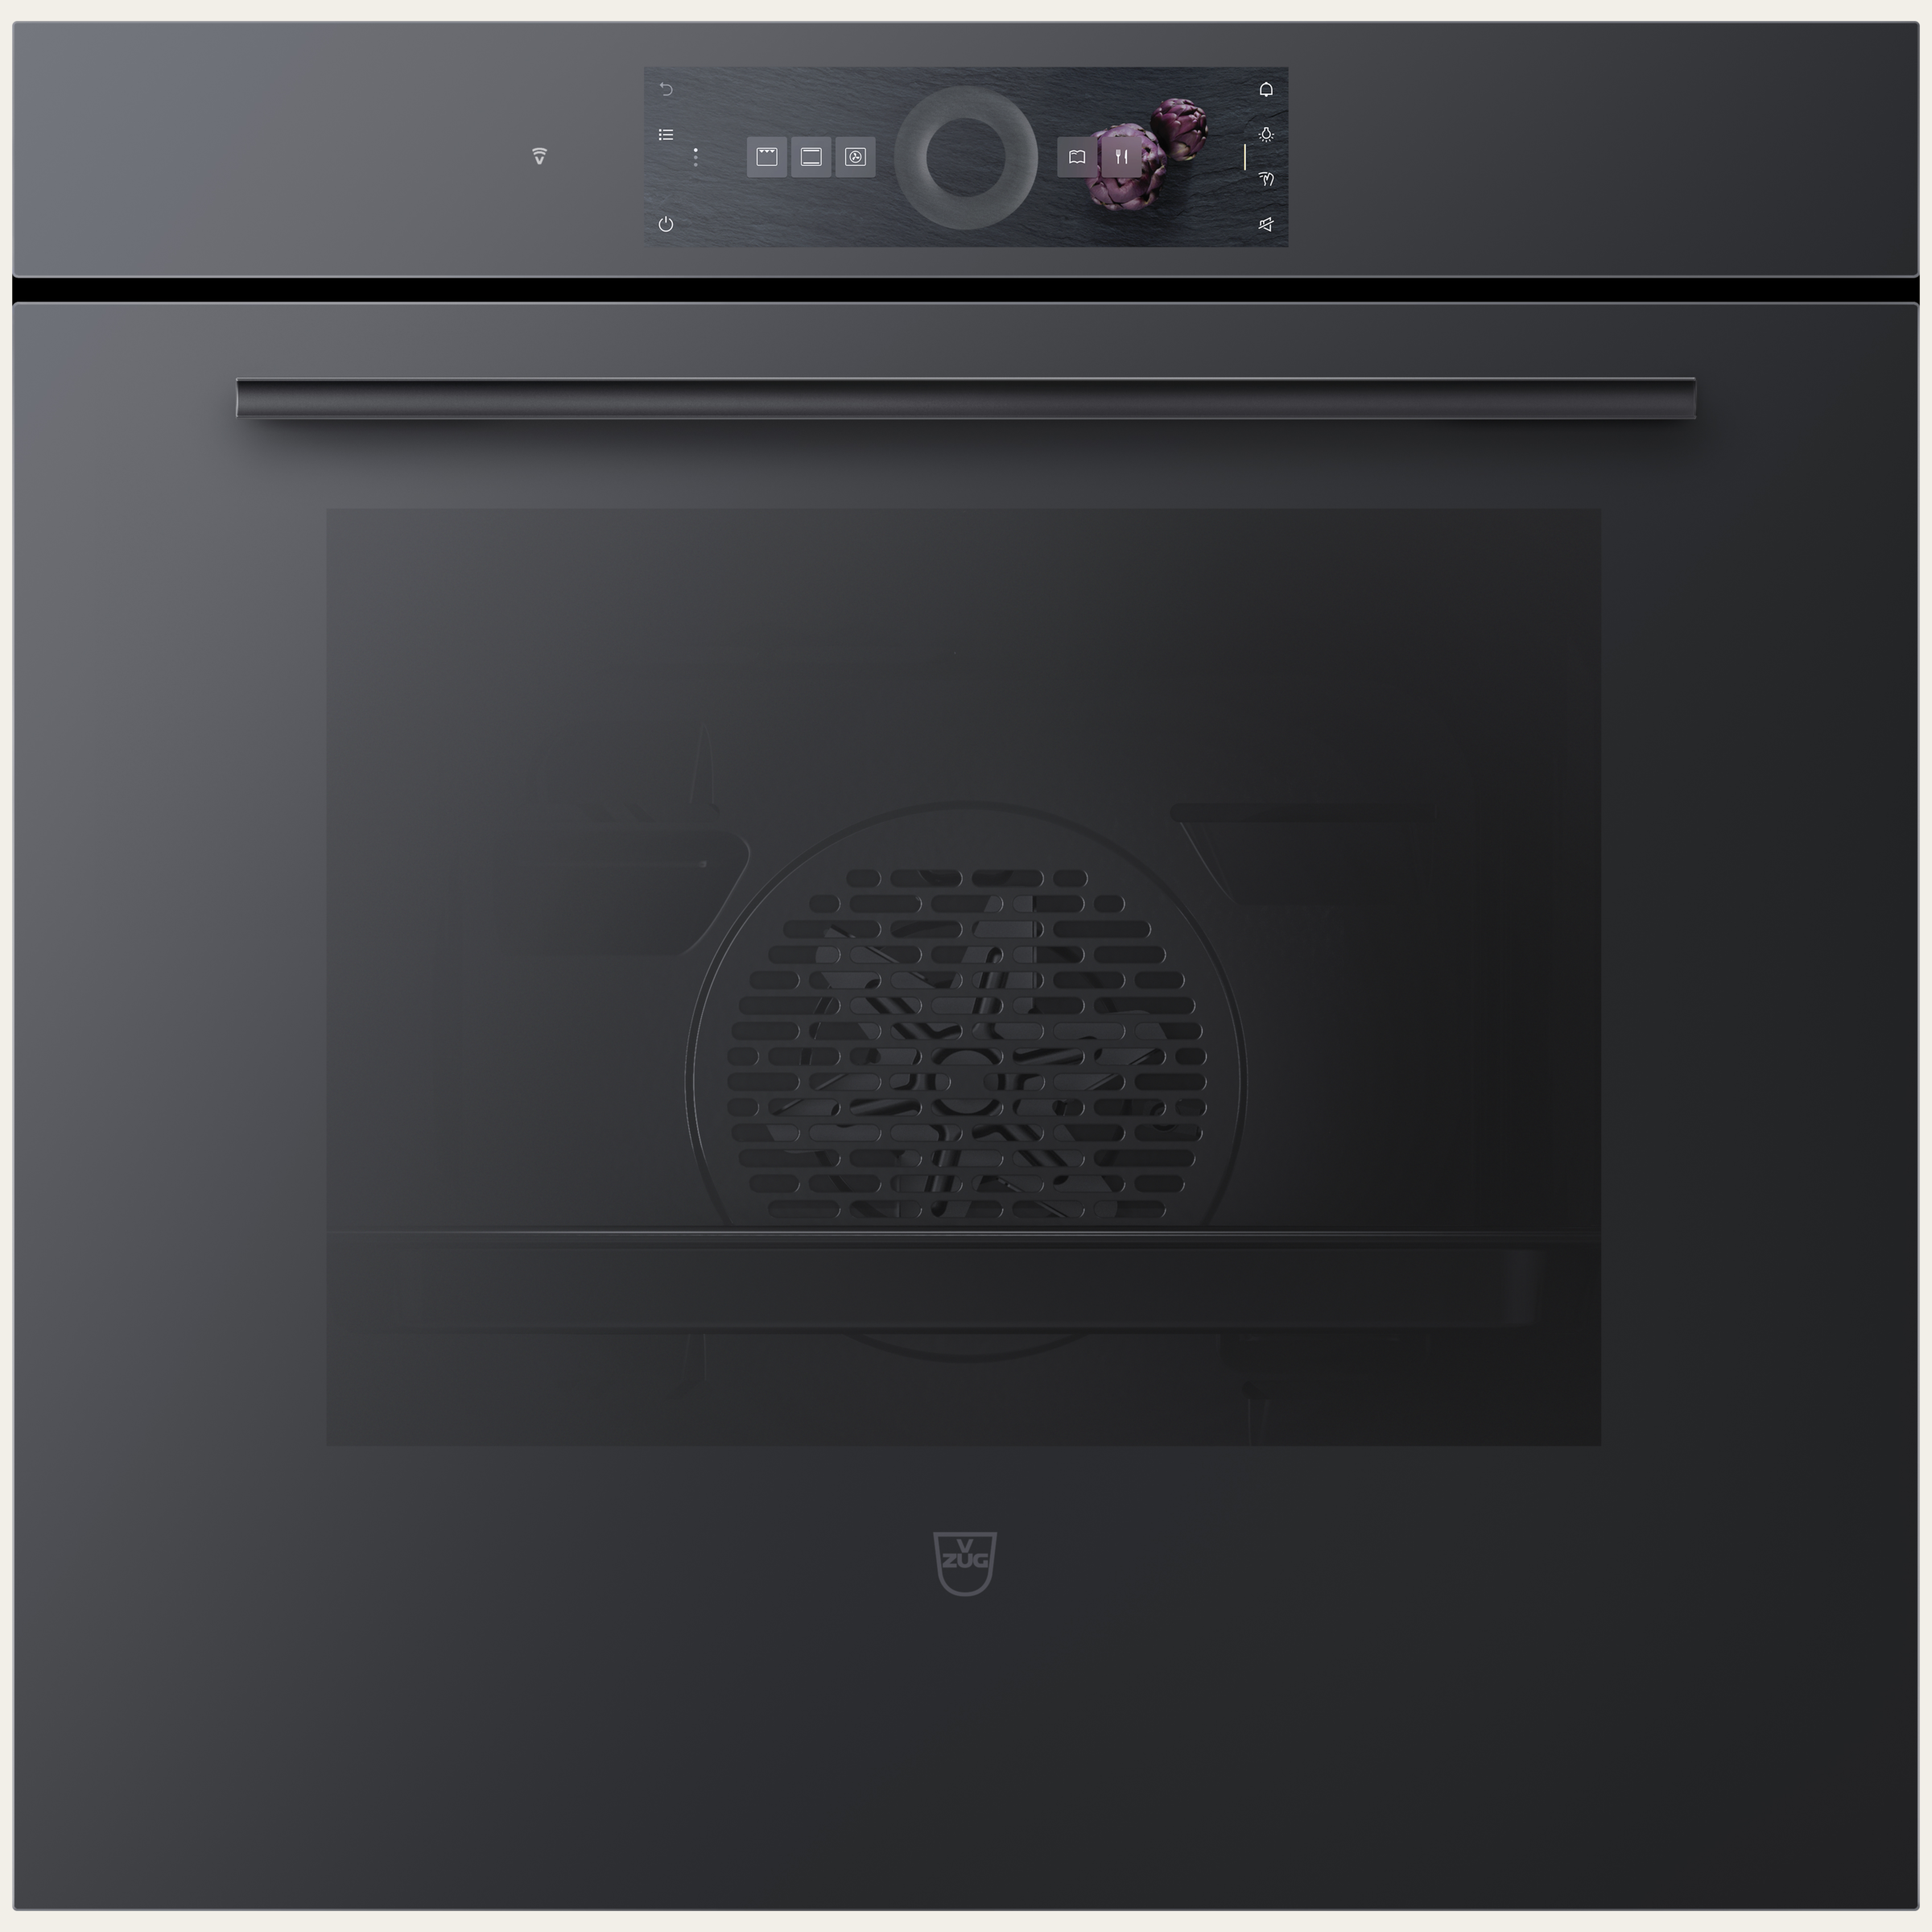 V-ZUG Oven Combair V4000 60P, Standard width: 60 cm,Standard height: 60 cm, Black mirror glass, Touchscreen with CircleSlider, V-ZUG-Home, Pyrolytic self-cleaning